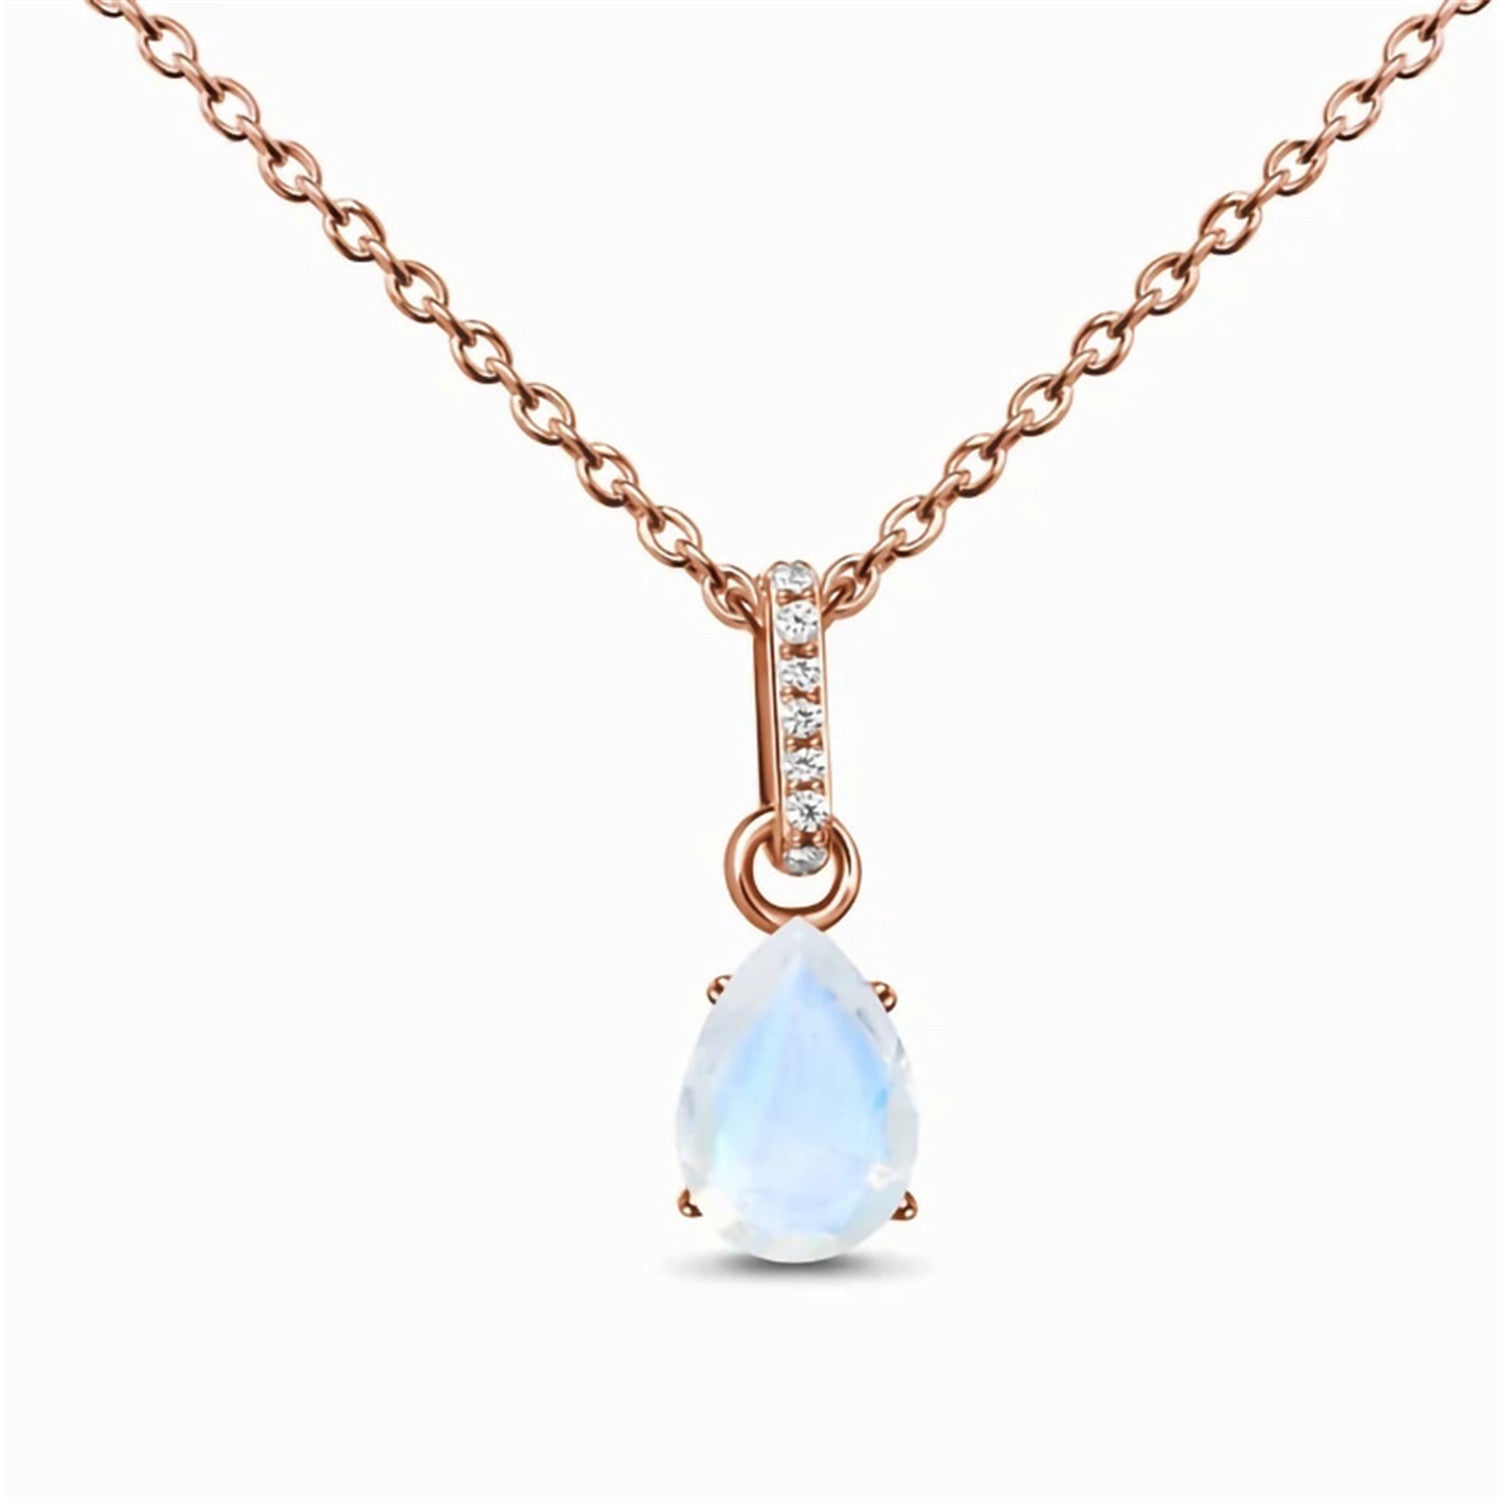 Moonstone Pendant,s925 Silver,With Water Drop Design